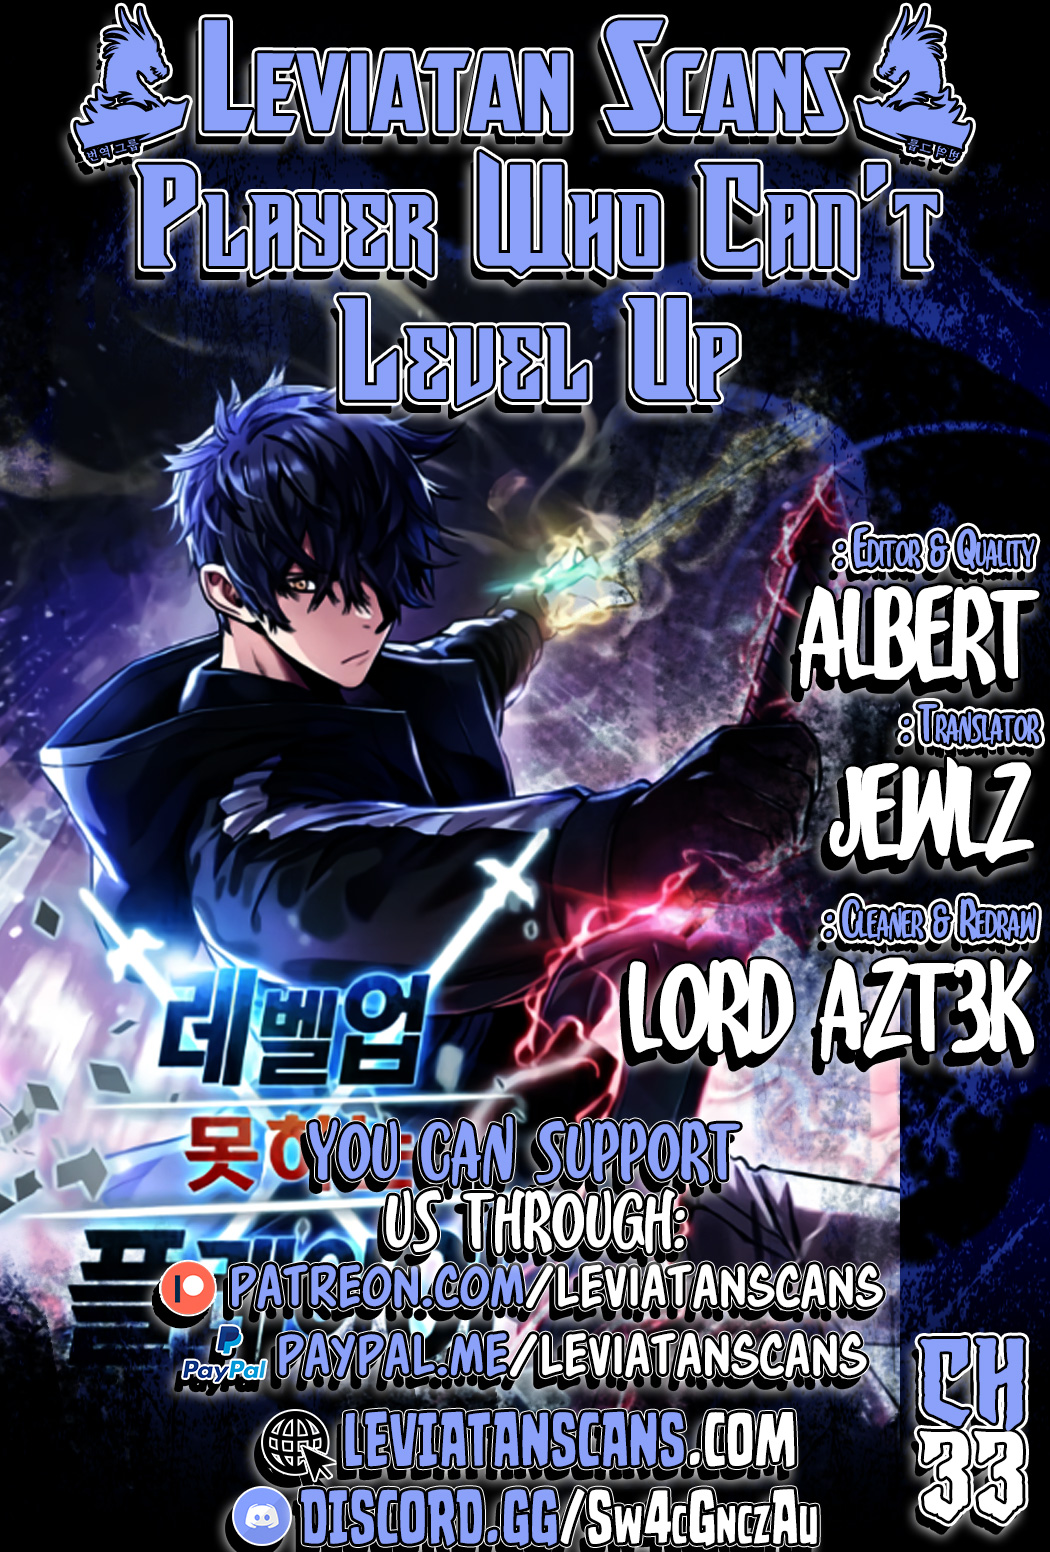 The Player That Can't Level Up - Chapter 5716 - Image 1